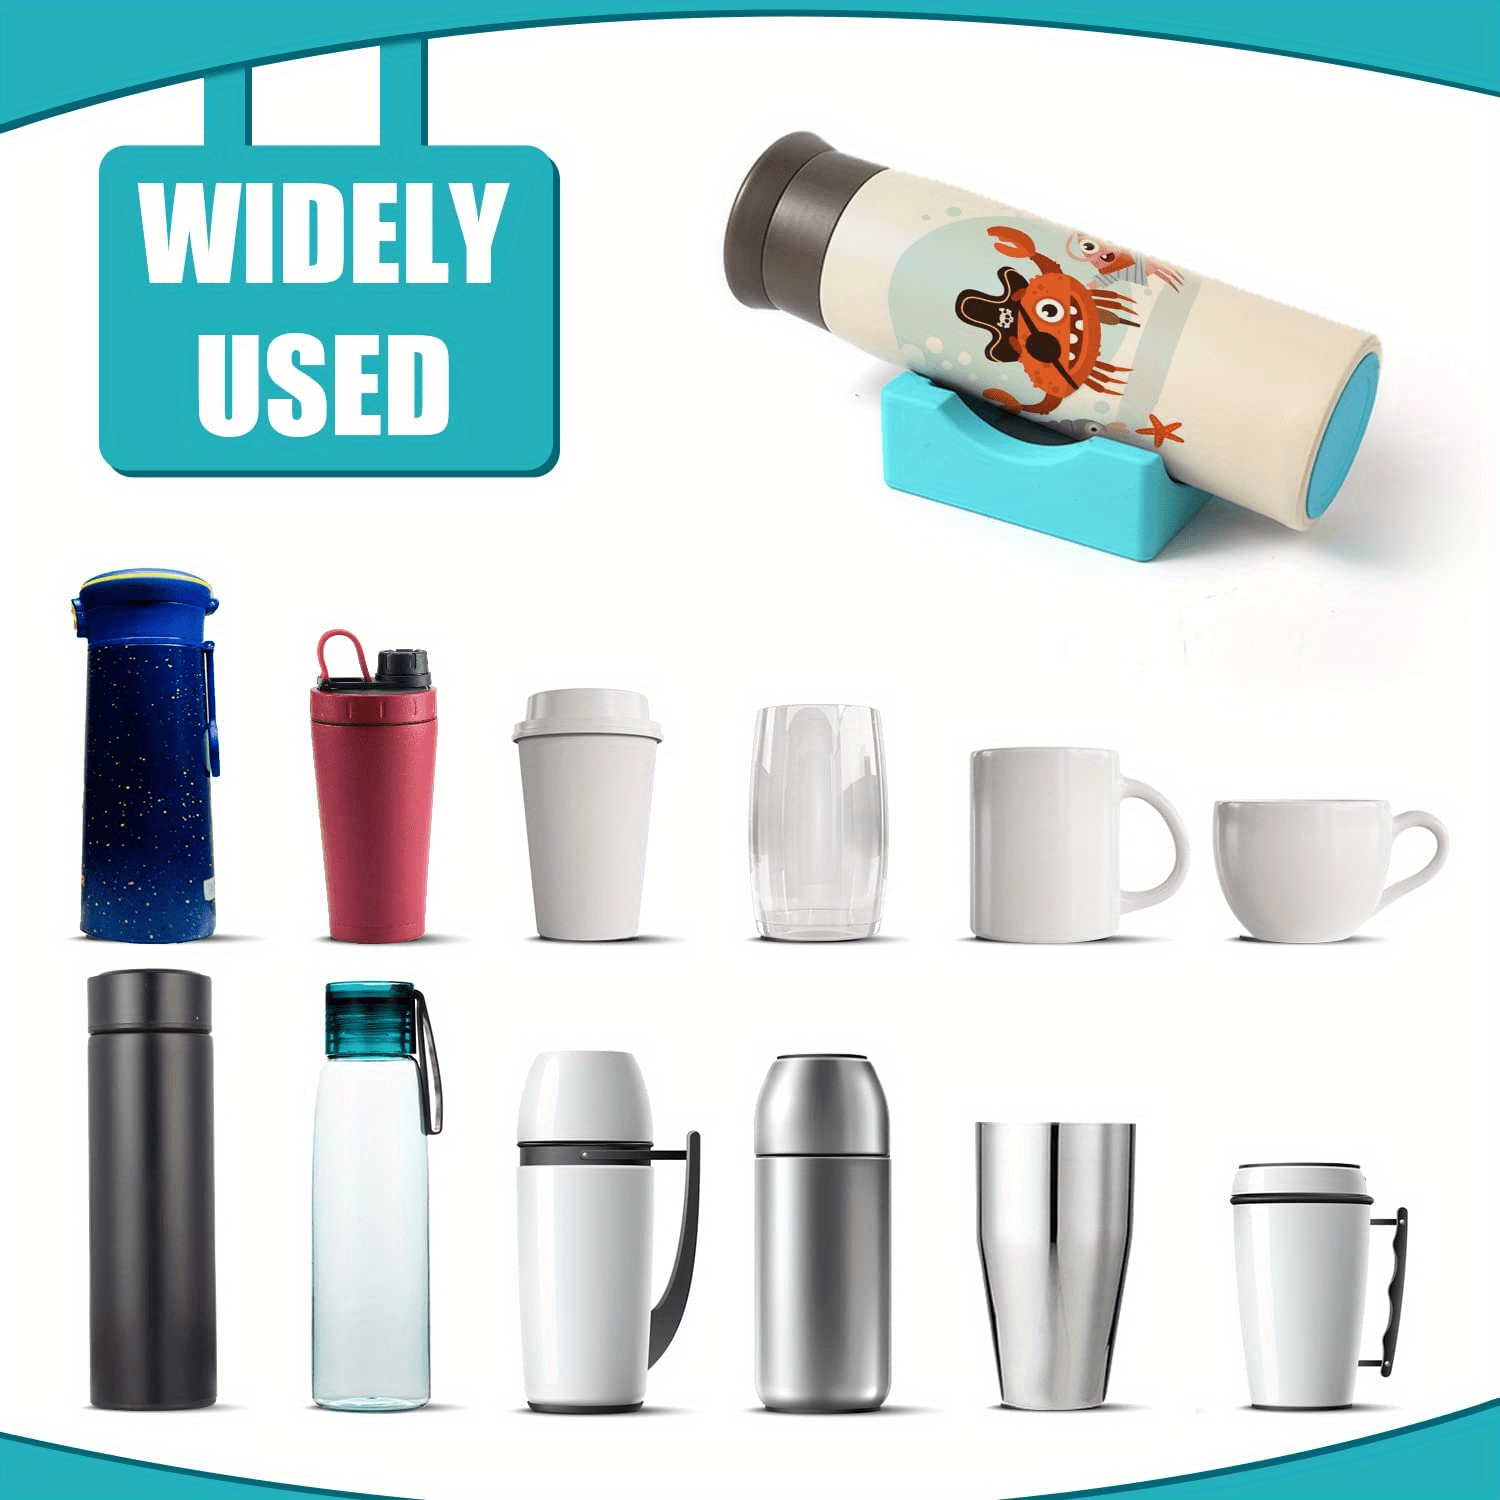 TINYSOME Silicone Cup Cradle Non-Slip Tumbler Holder with Built-in Slot for Glass  Cups Bottle Mugs Application Crafting 